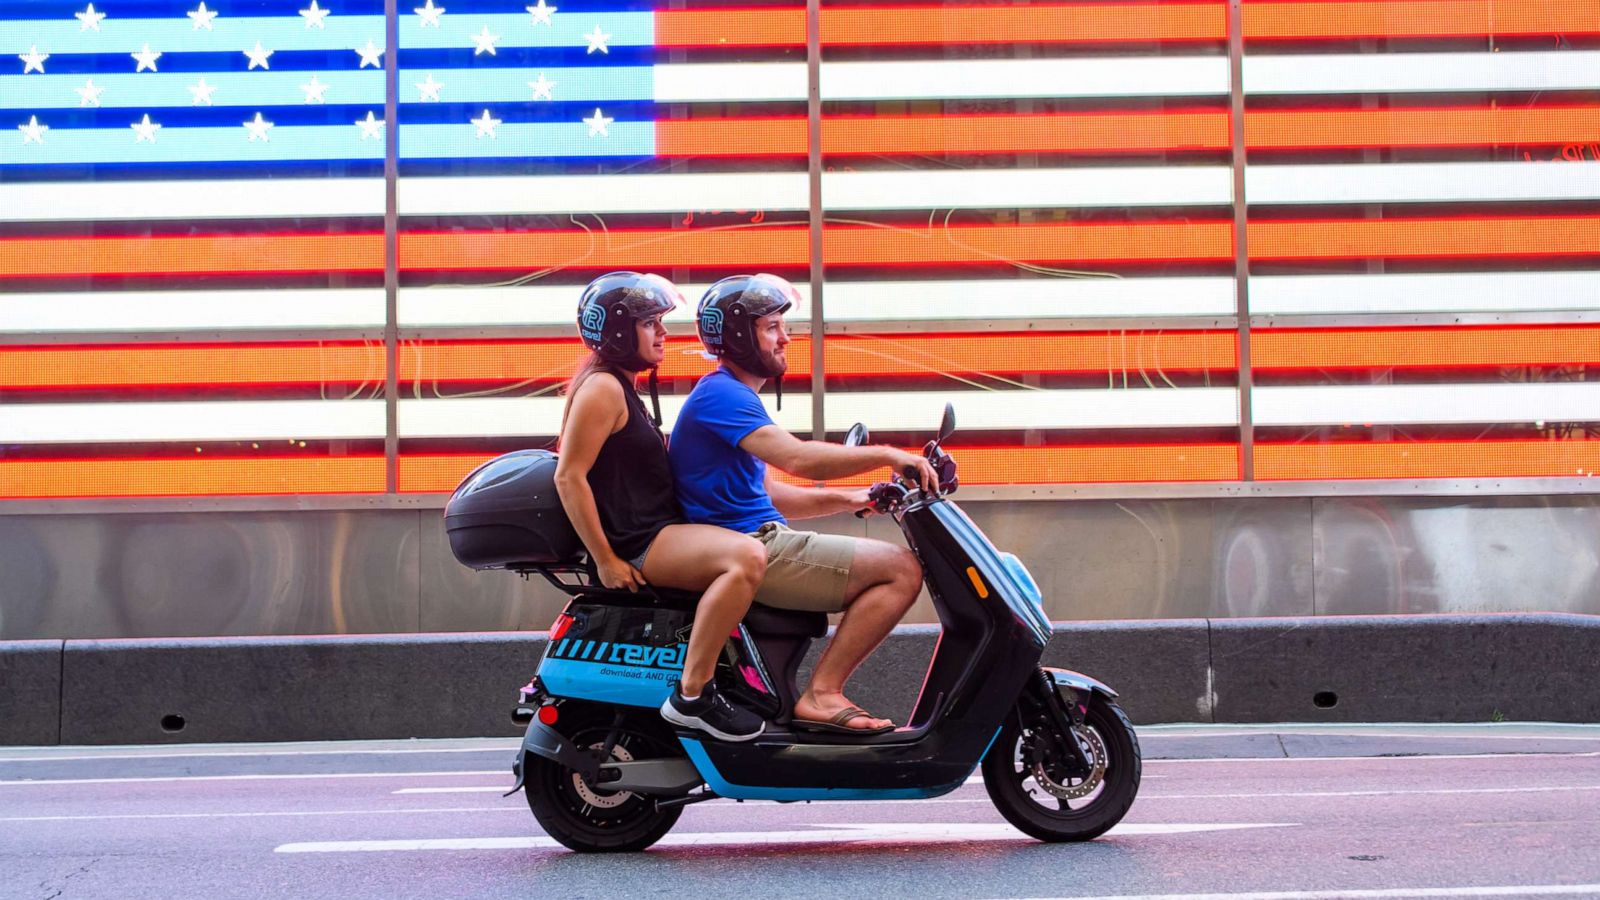 Why Revel Shut Down Its Moped Service in New York - The New York Times